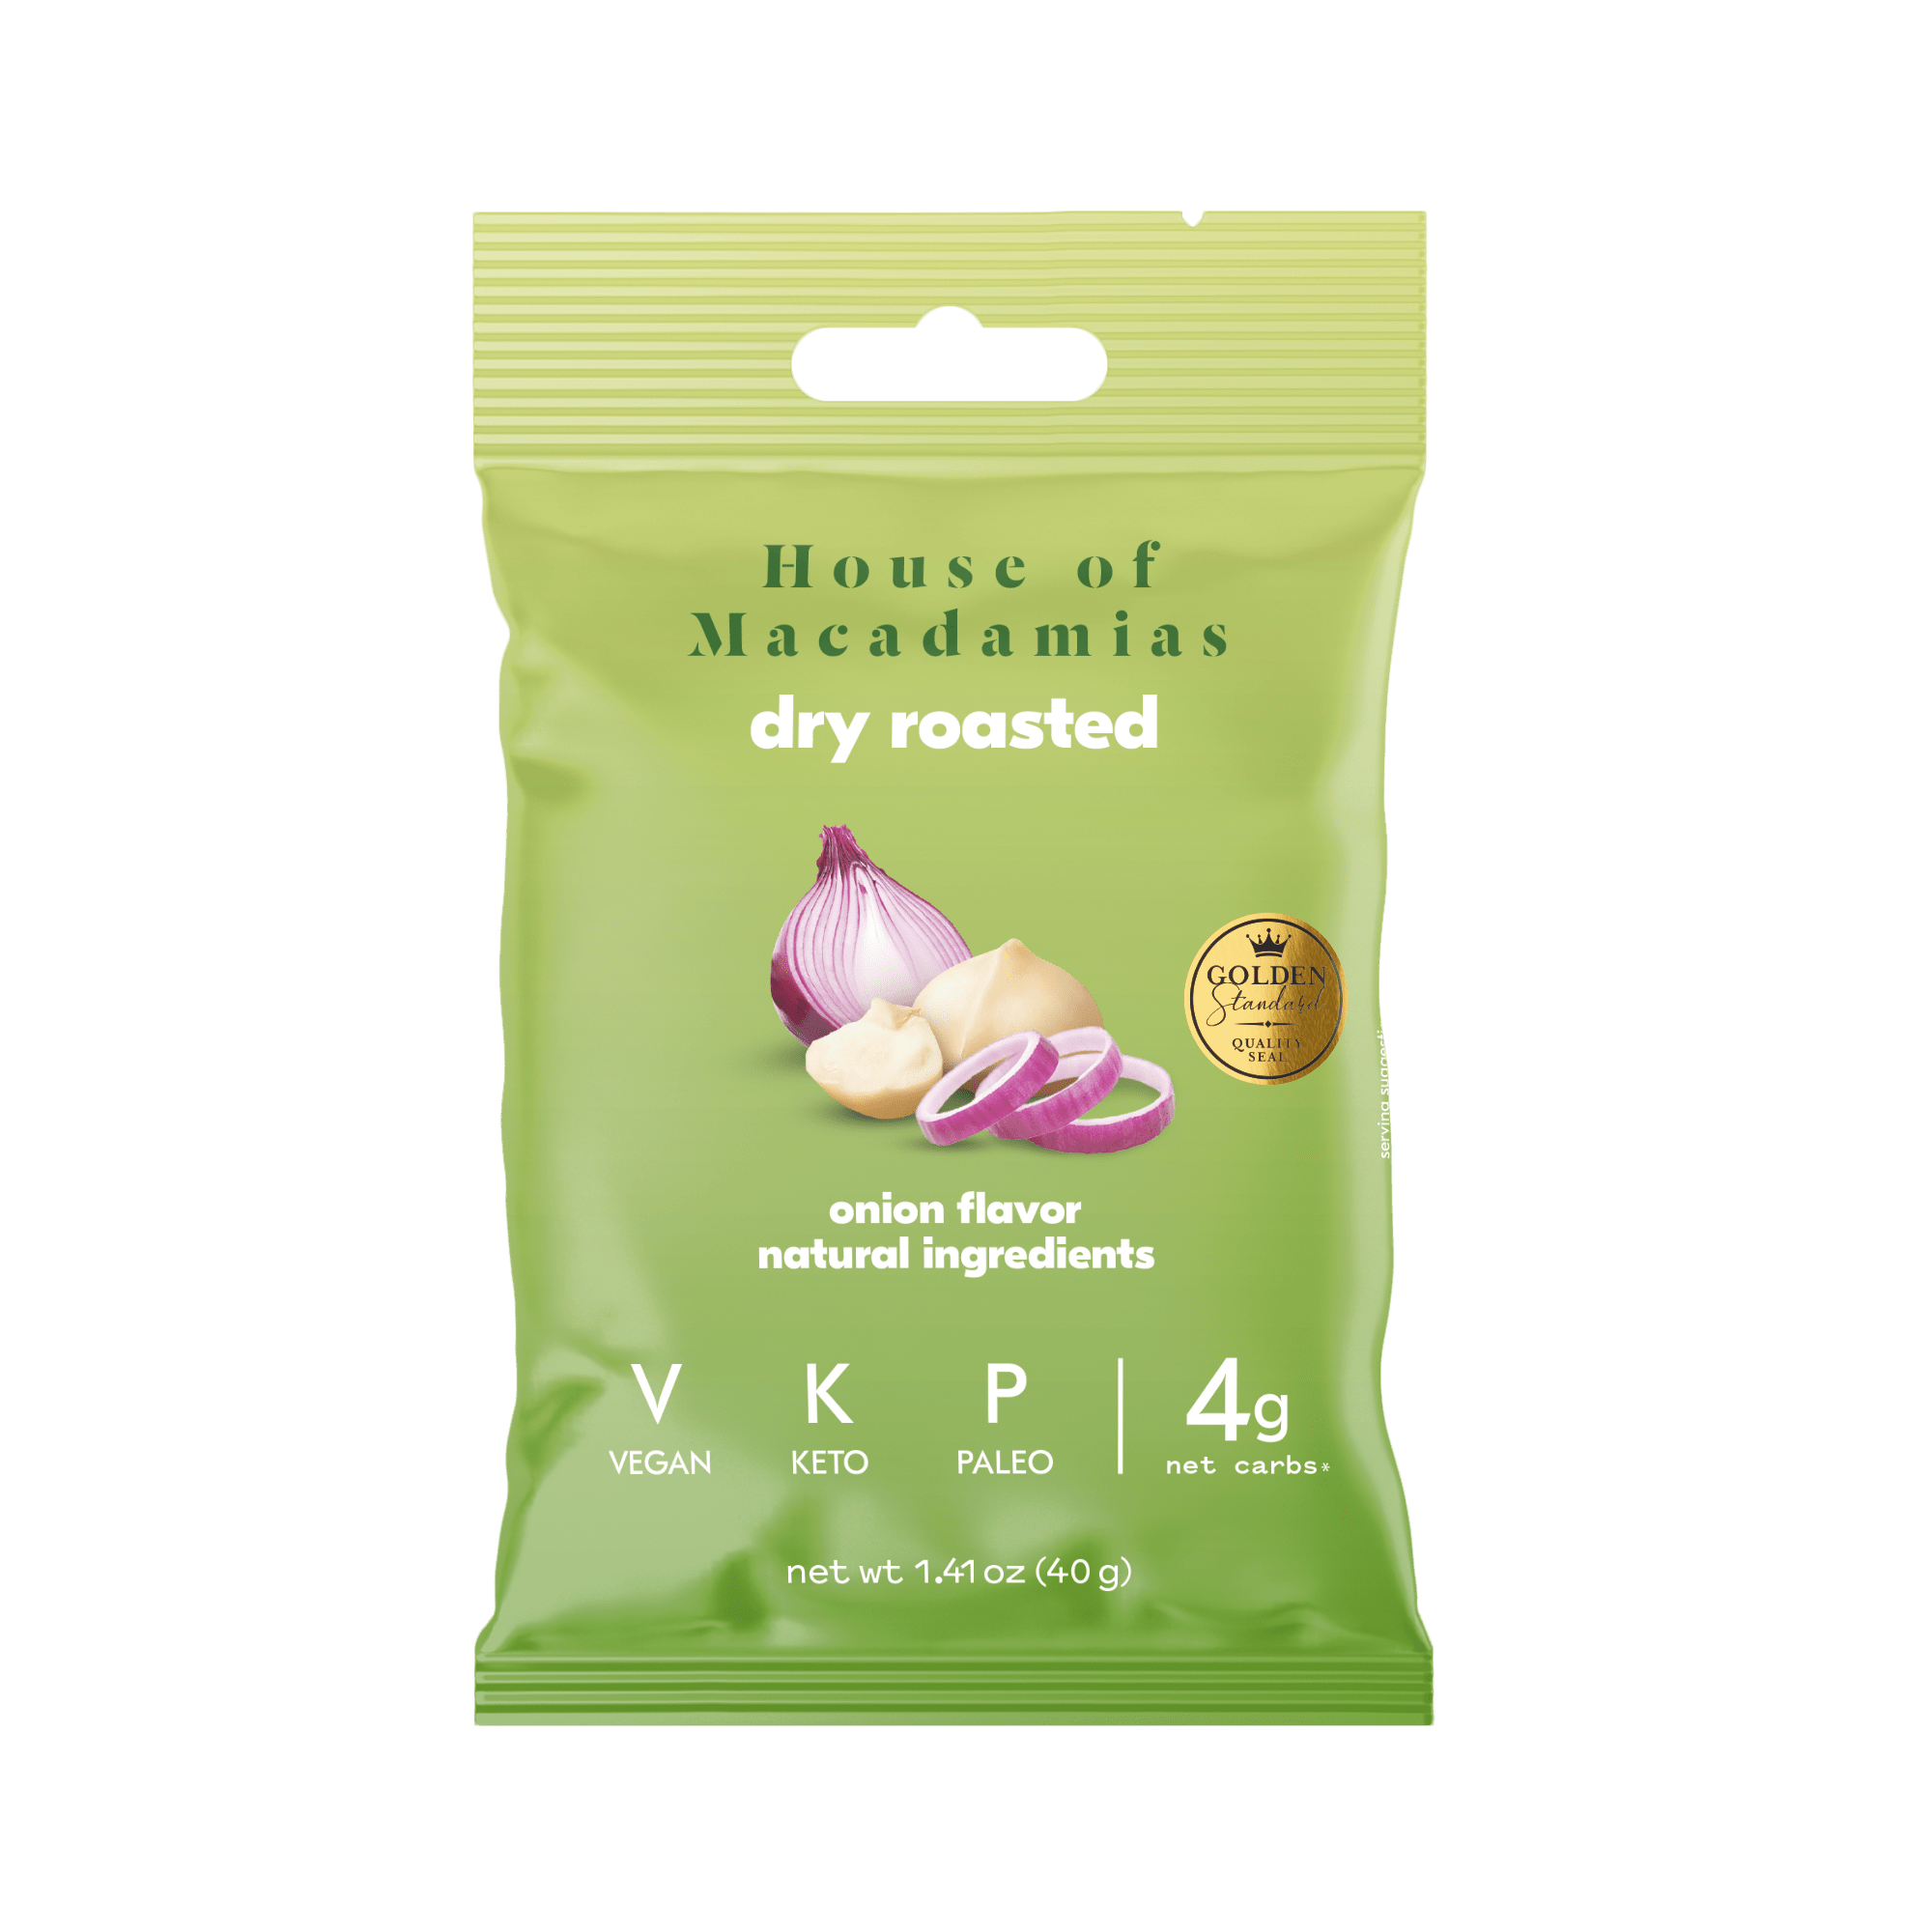 Macadamia Nut Variety Pack (6 Flavors, 12 Bags)